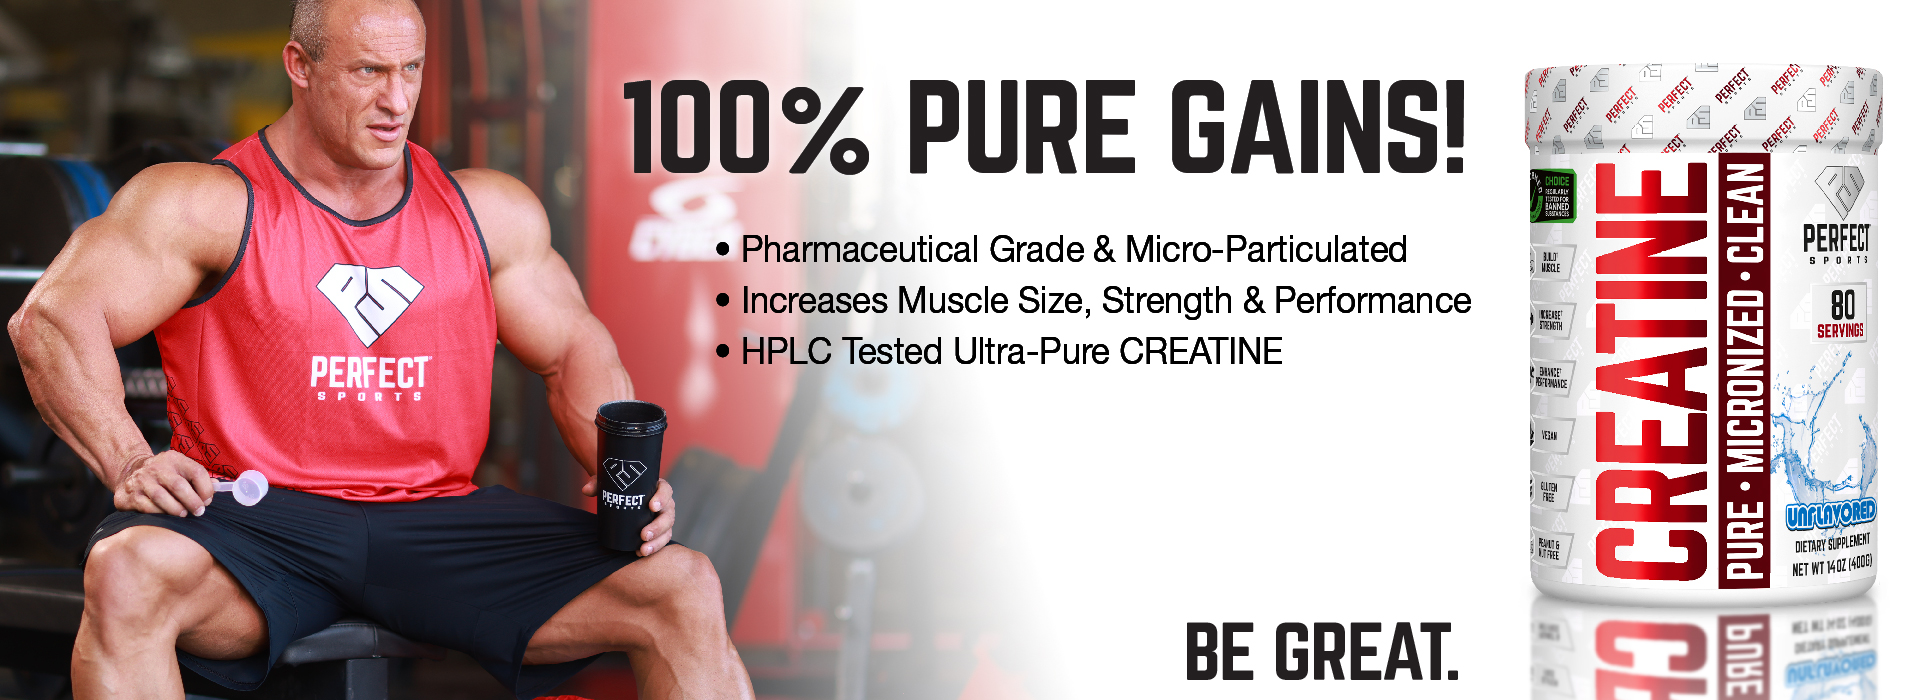 Creatine by PERFECT Sports 100% Pure Gains